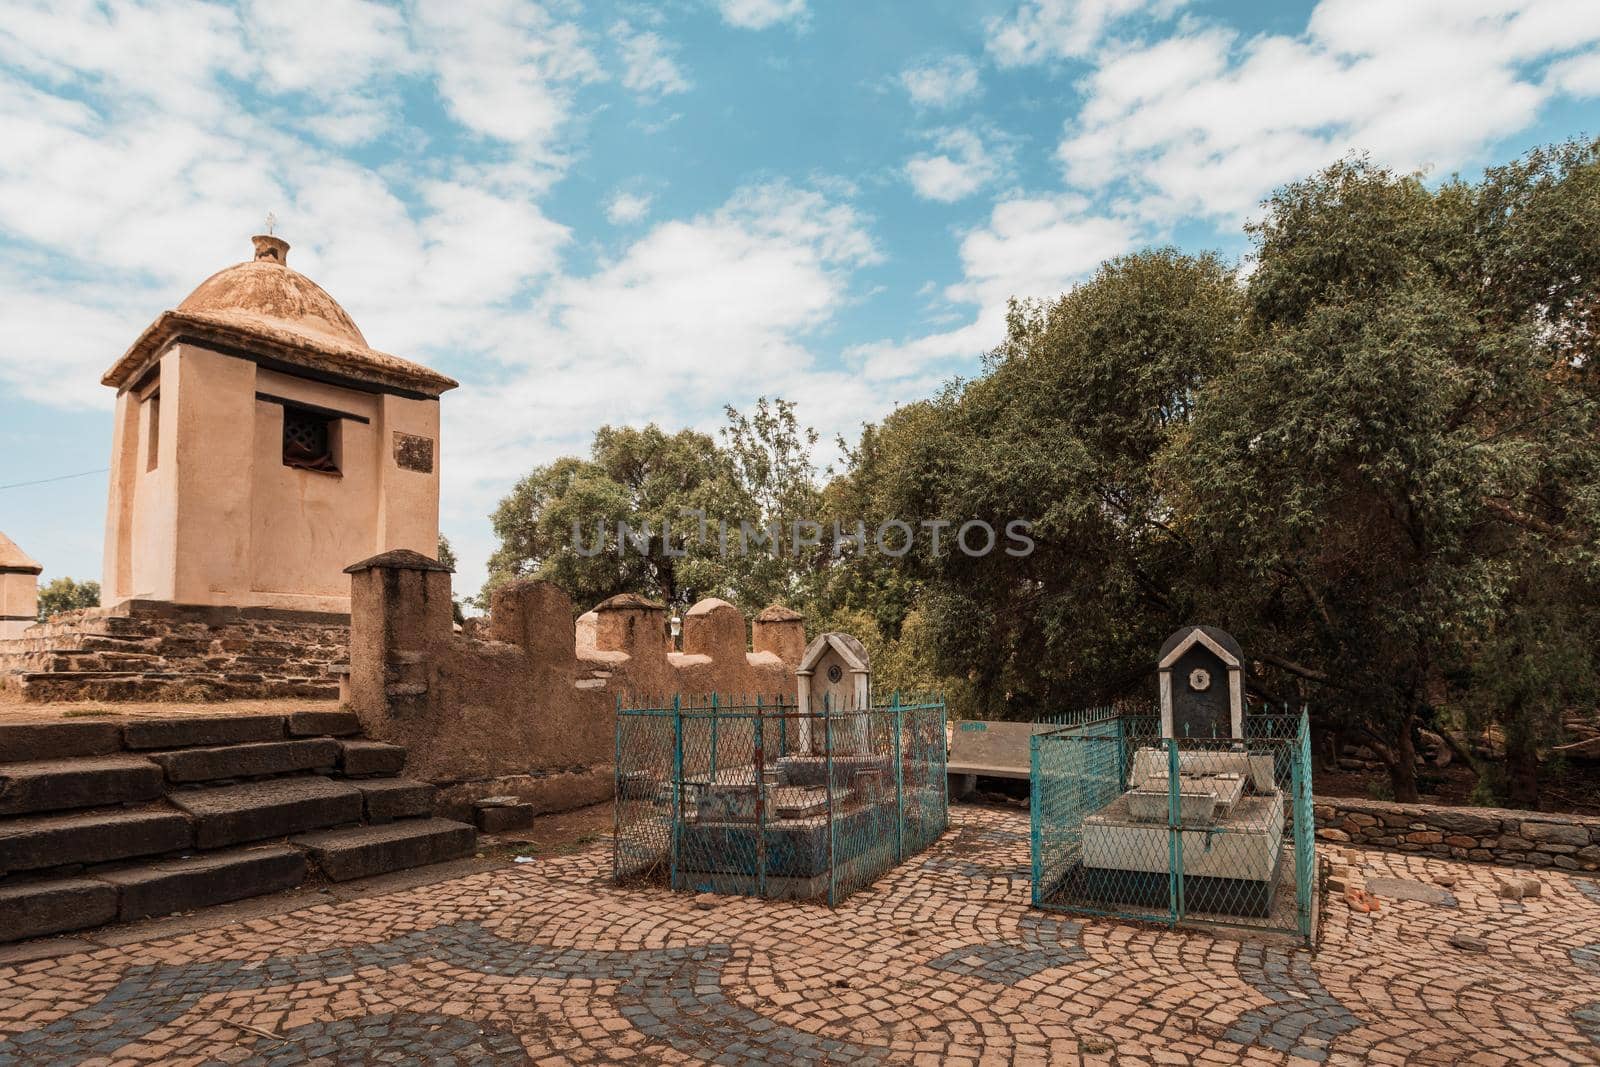 two tombs in Church of Our Lady St. Mary of Zion, the most sacred place for all Orthodox Ethiopians in Axum, Ethiopia.